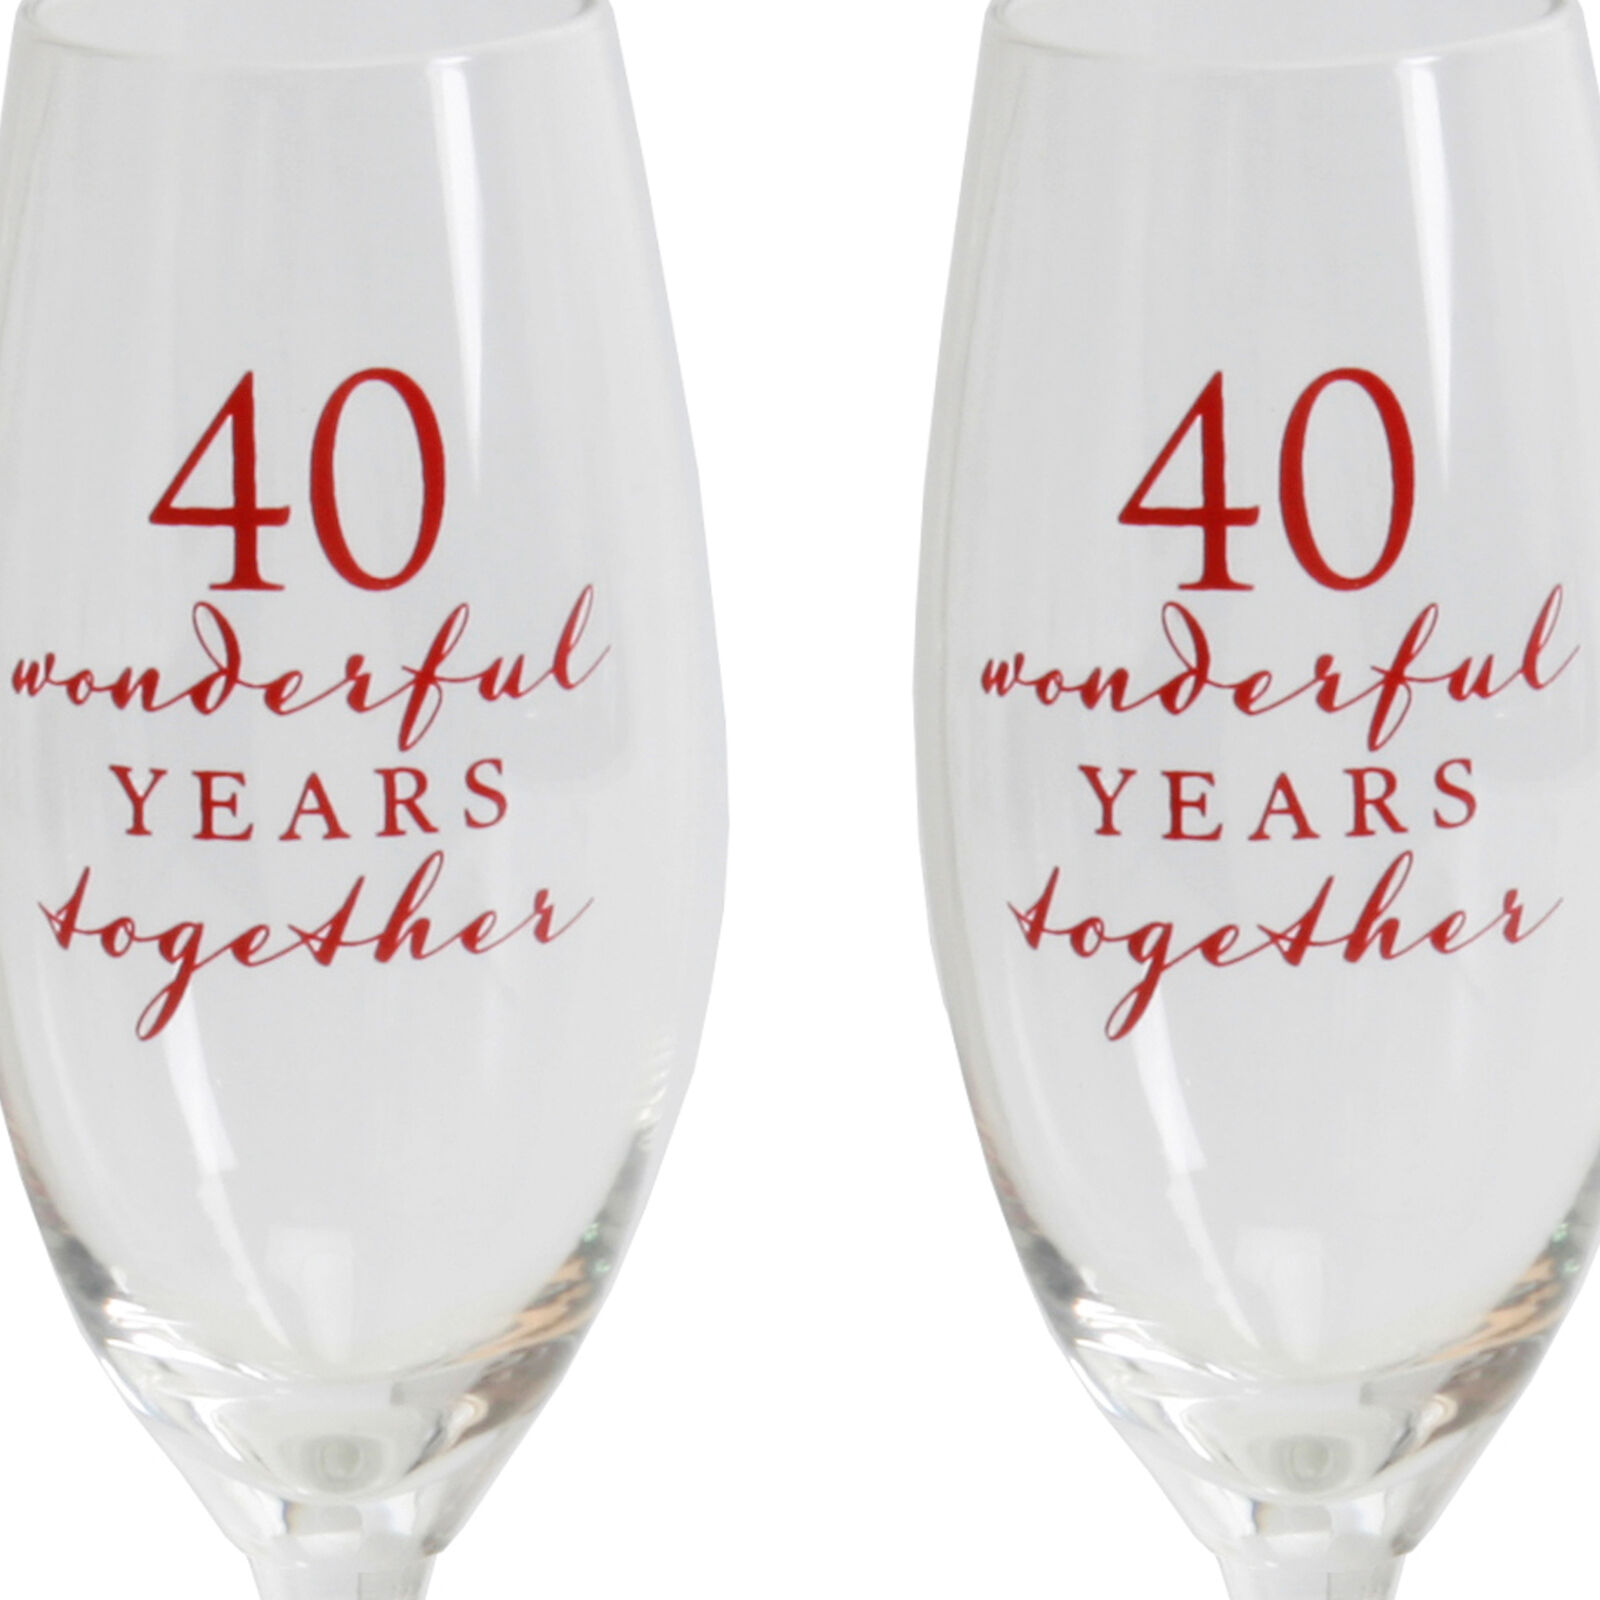 Amore Set of 2 Gift Boxed Champagne Flutes - 40th Anniversary